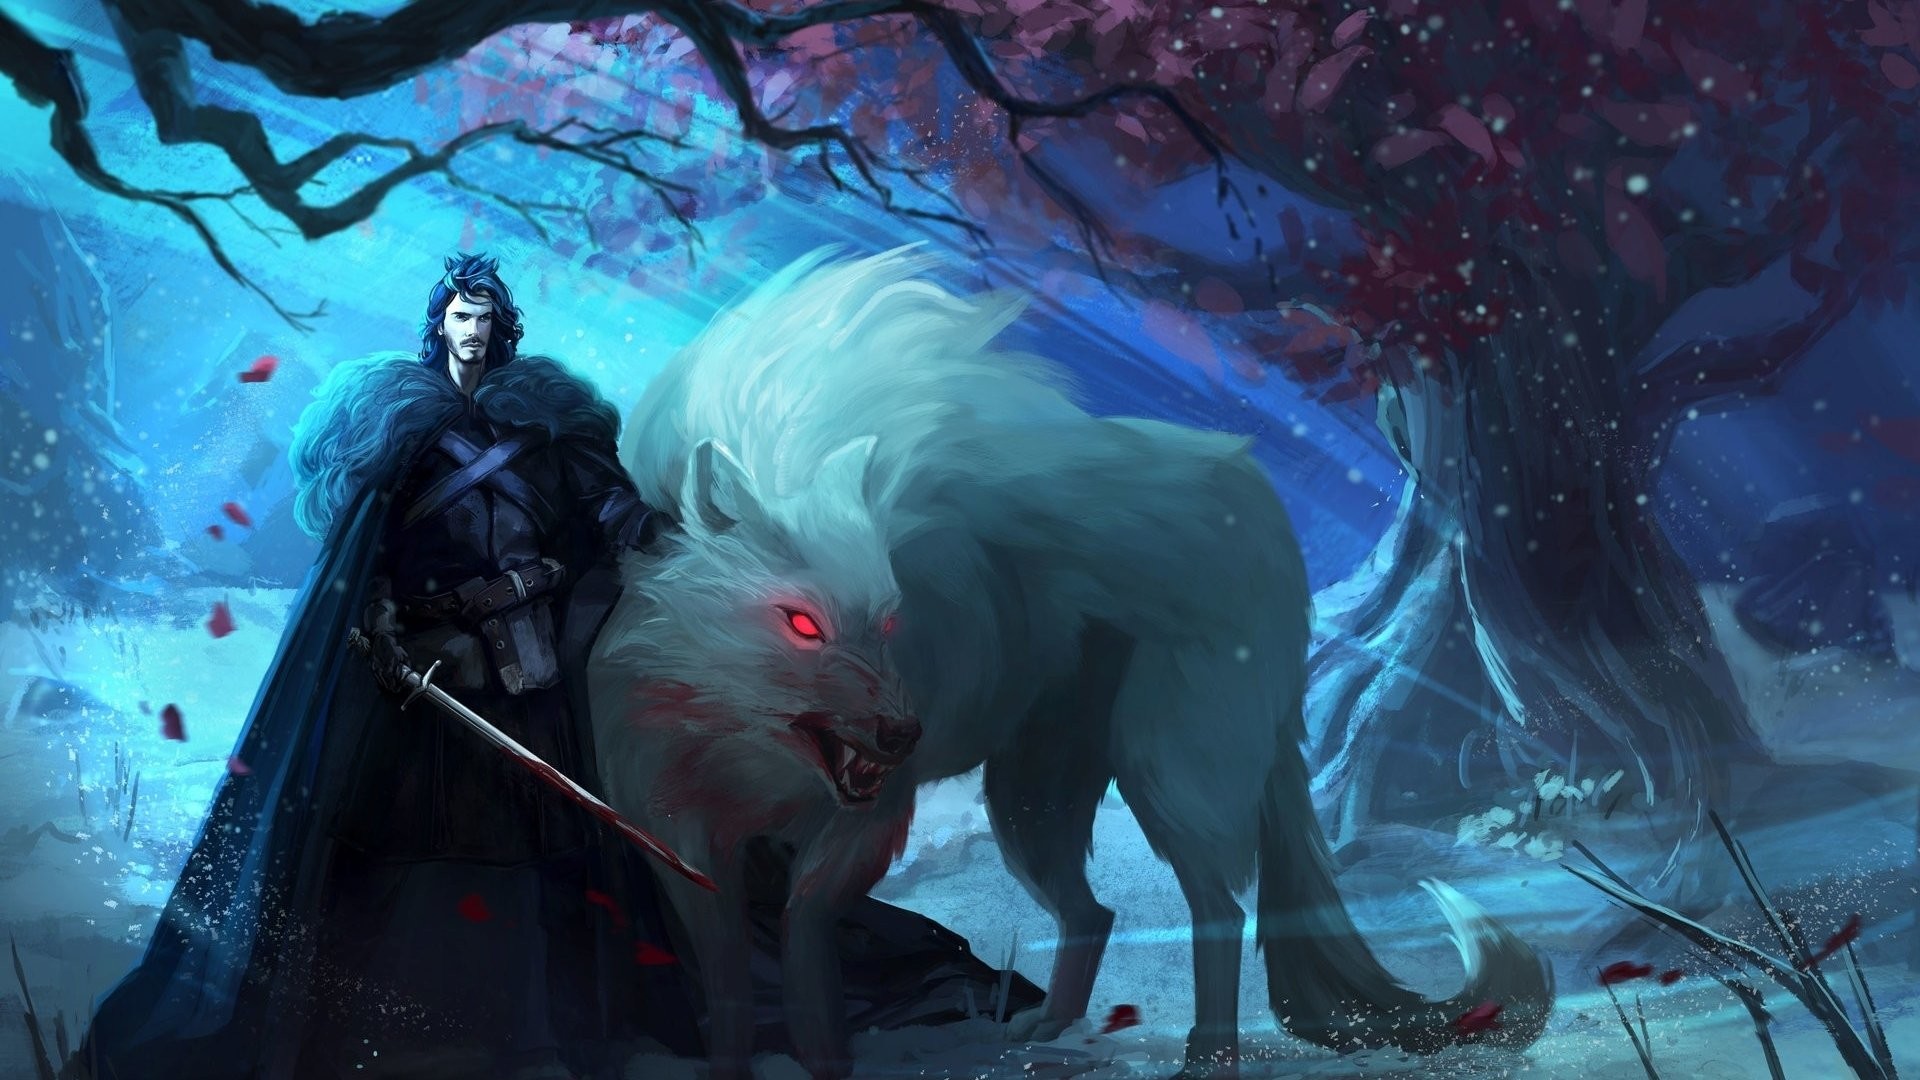 1920x1080 Fantasy - A Song Of Ice And Fire Game Of Thrones Jon Snow Wallpaper